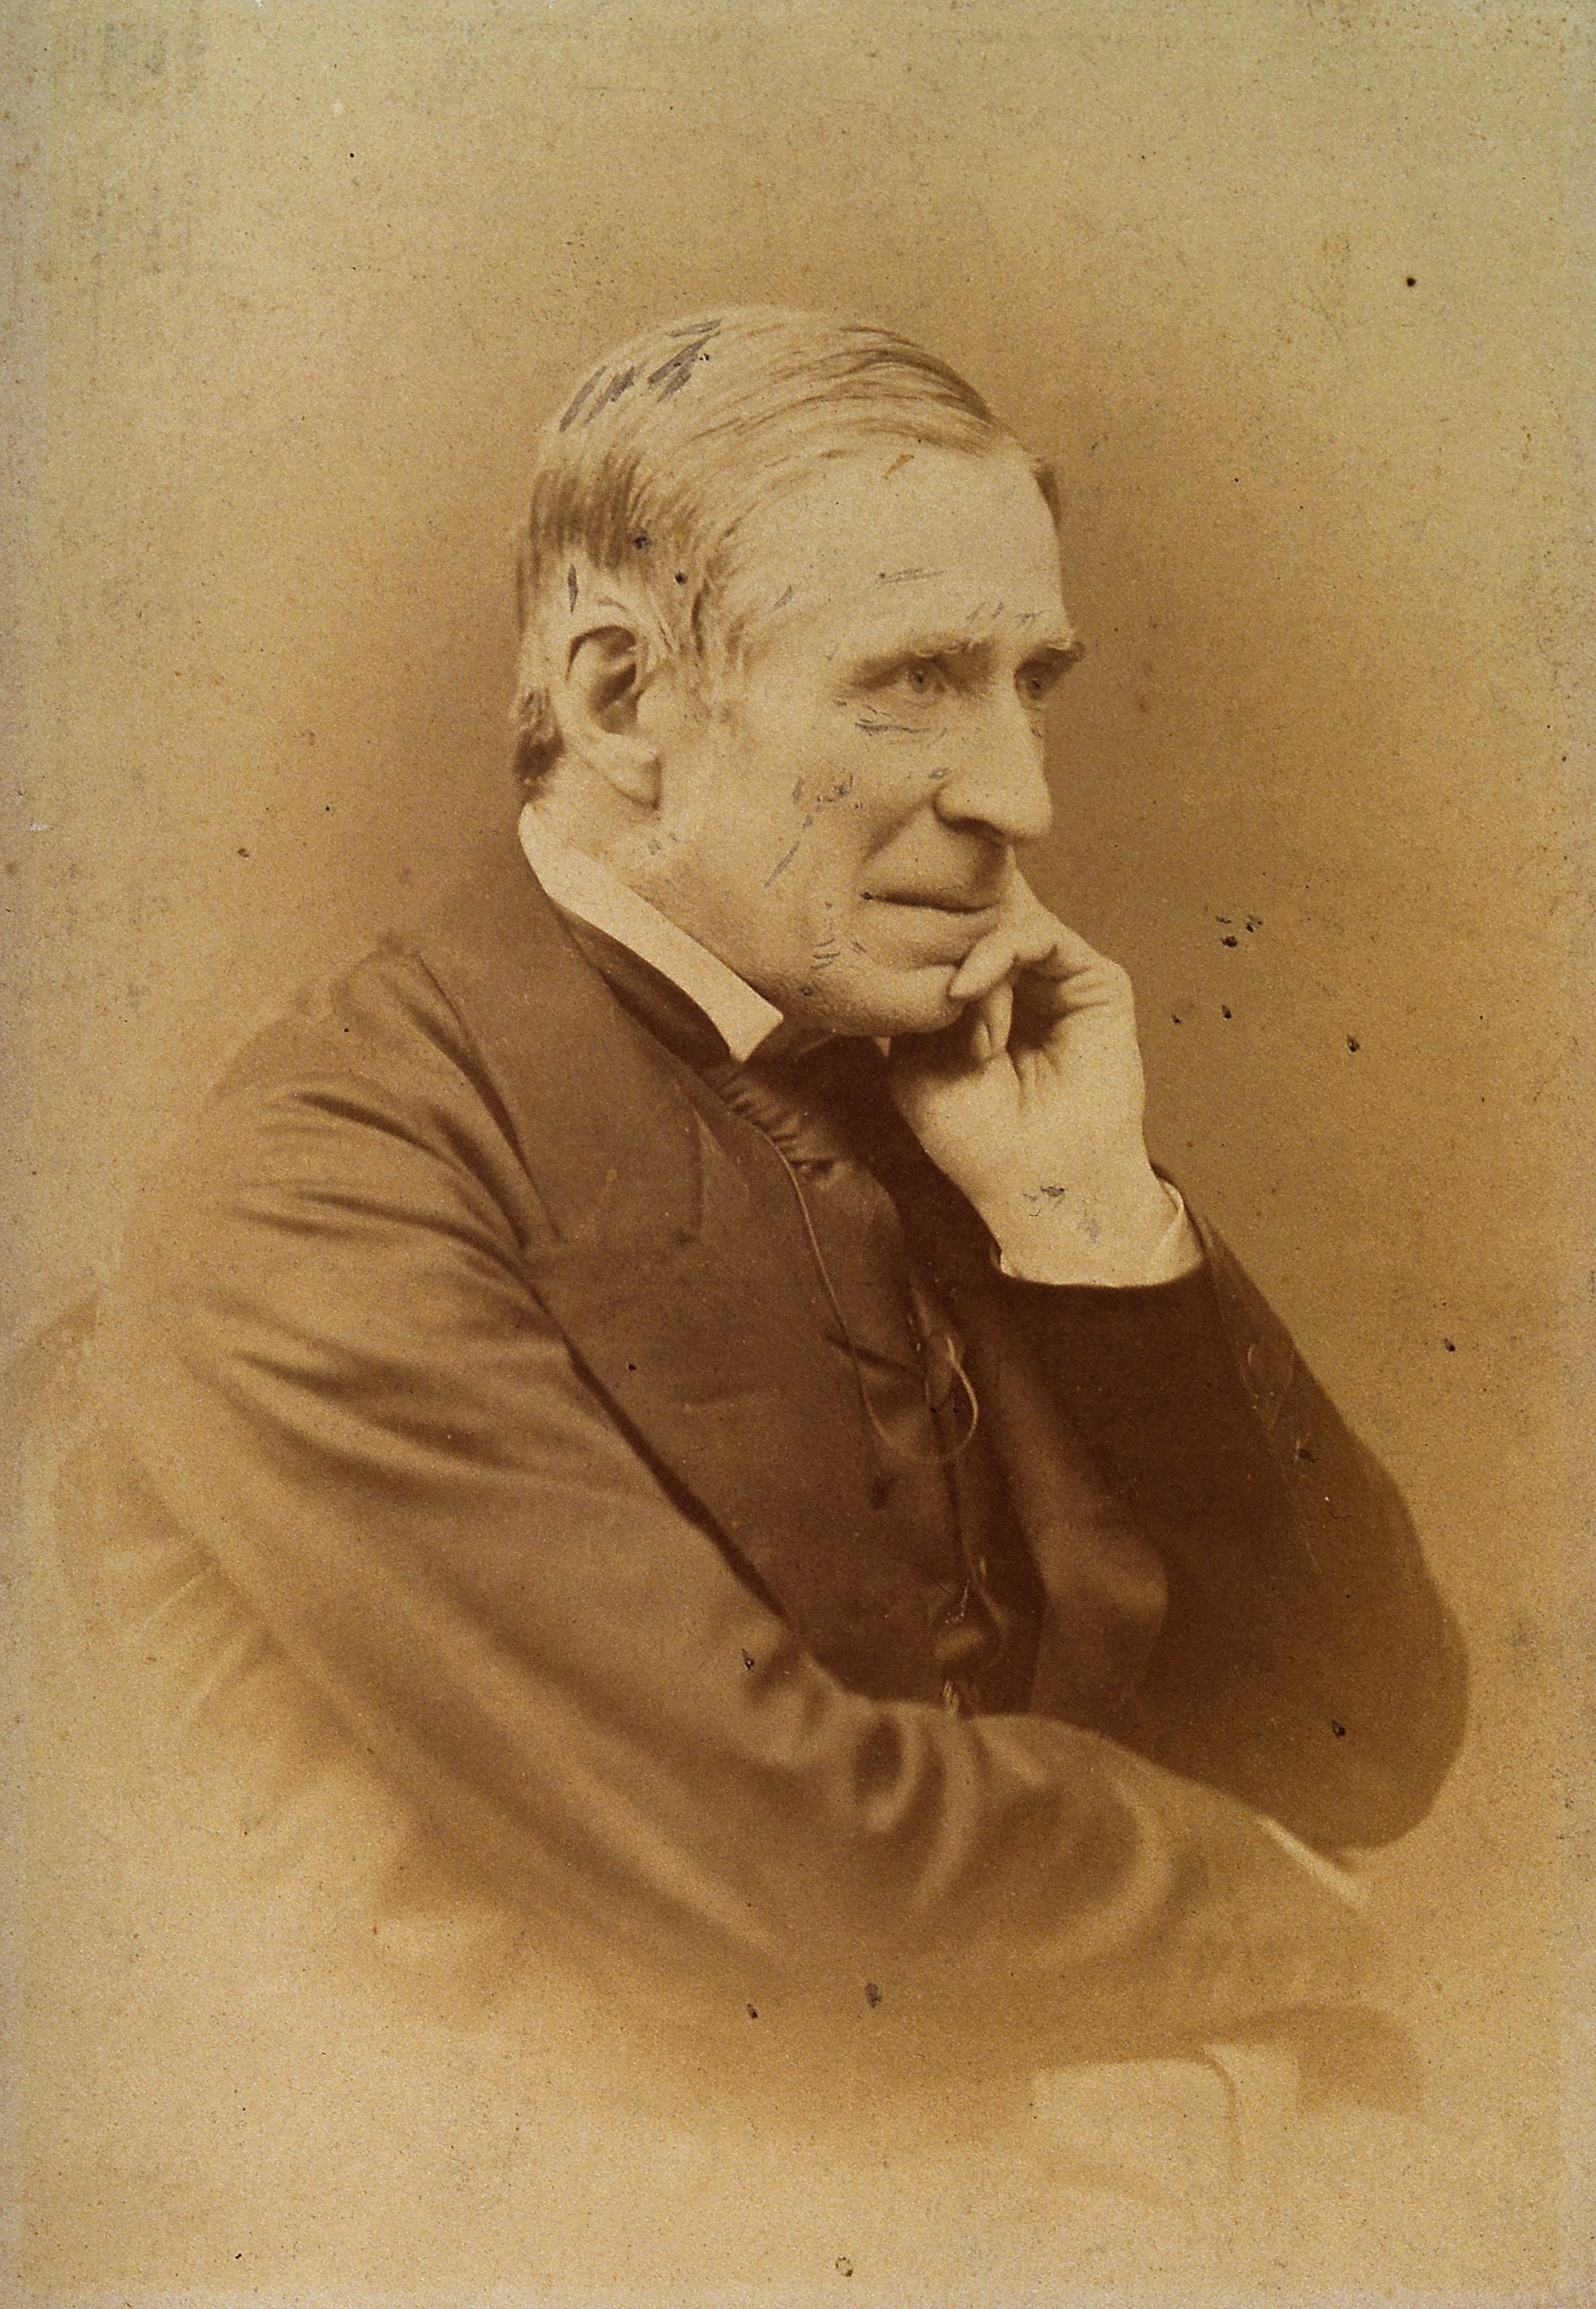 Sir James Paget. Photograph by G. Jerrard. Wellcome V0026961